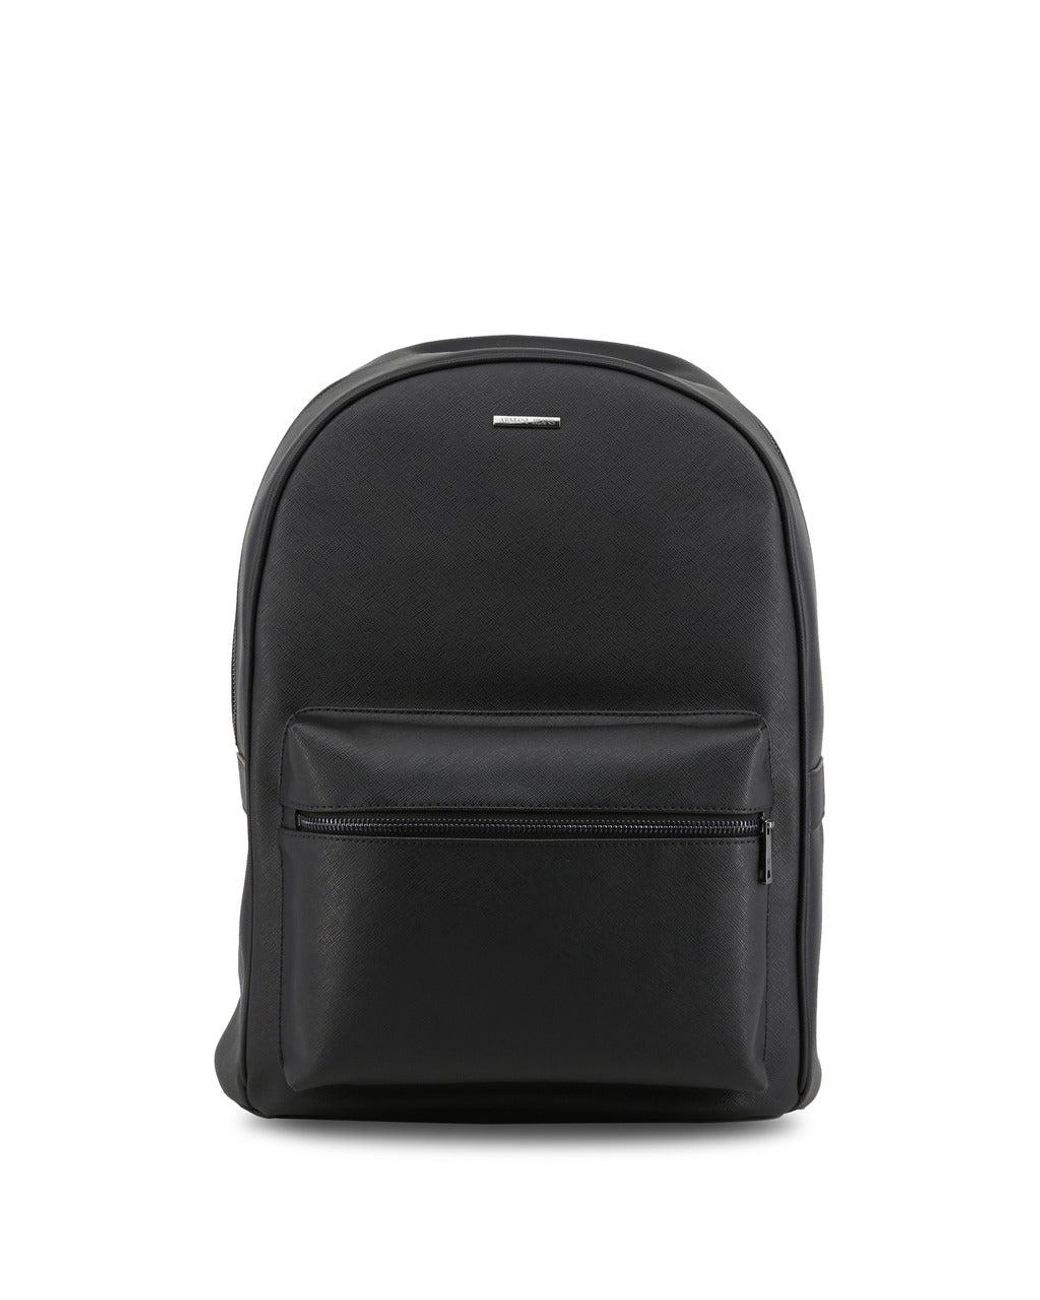 Armani Jeans Leather Backpack Black 932523 Cd991 for Men - Save 4% - Lyst